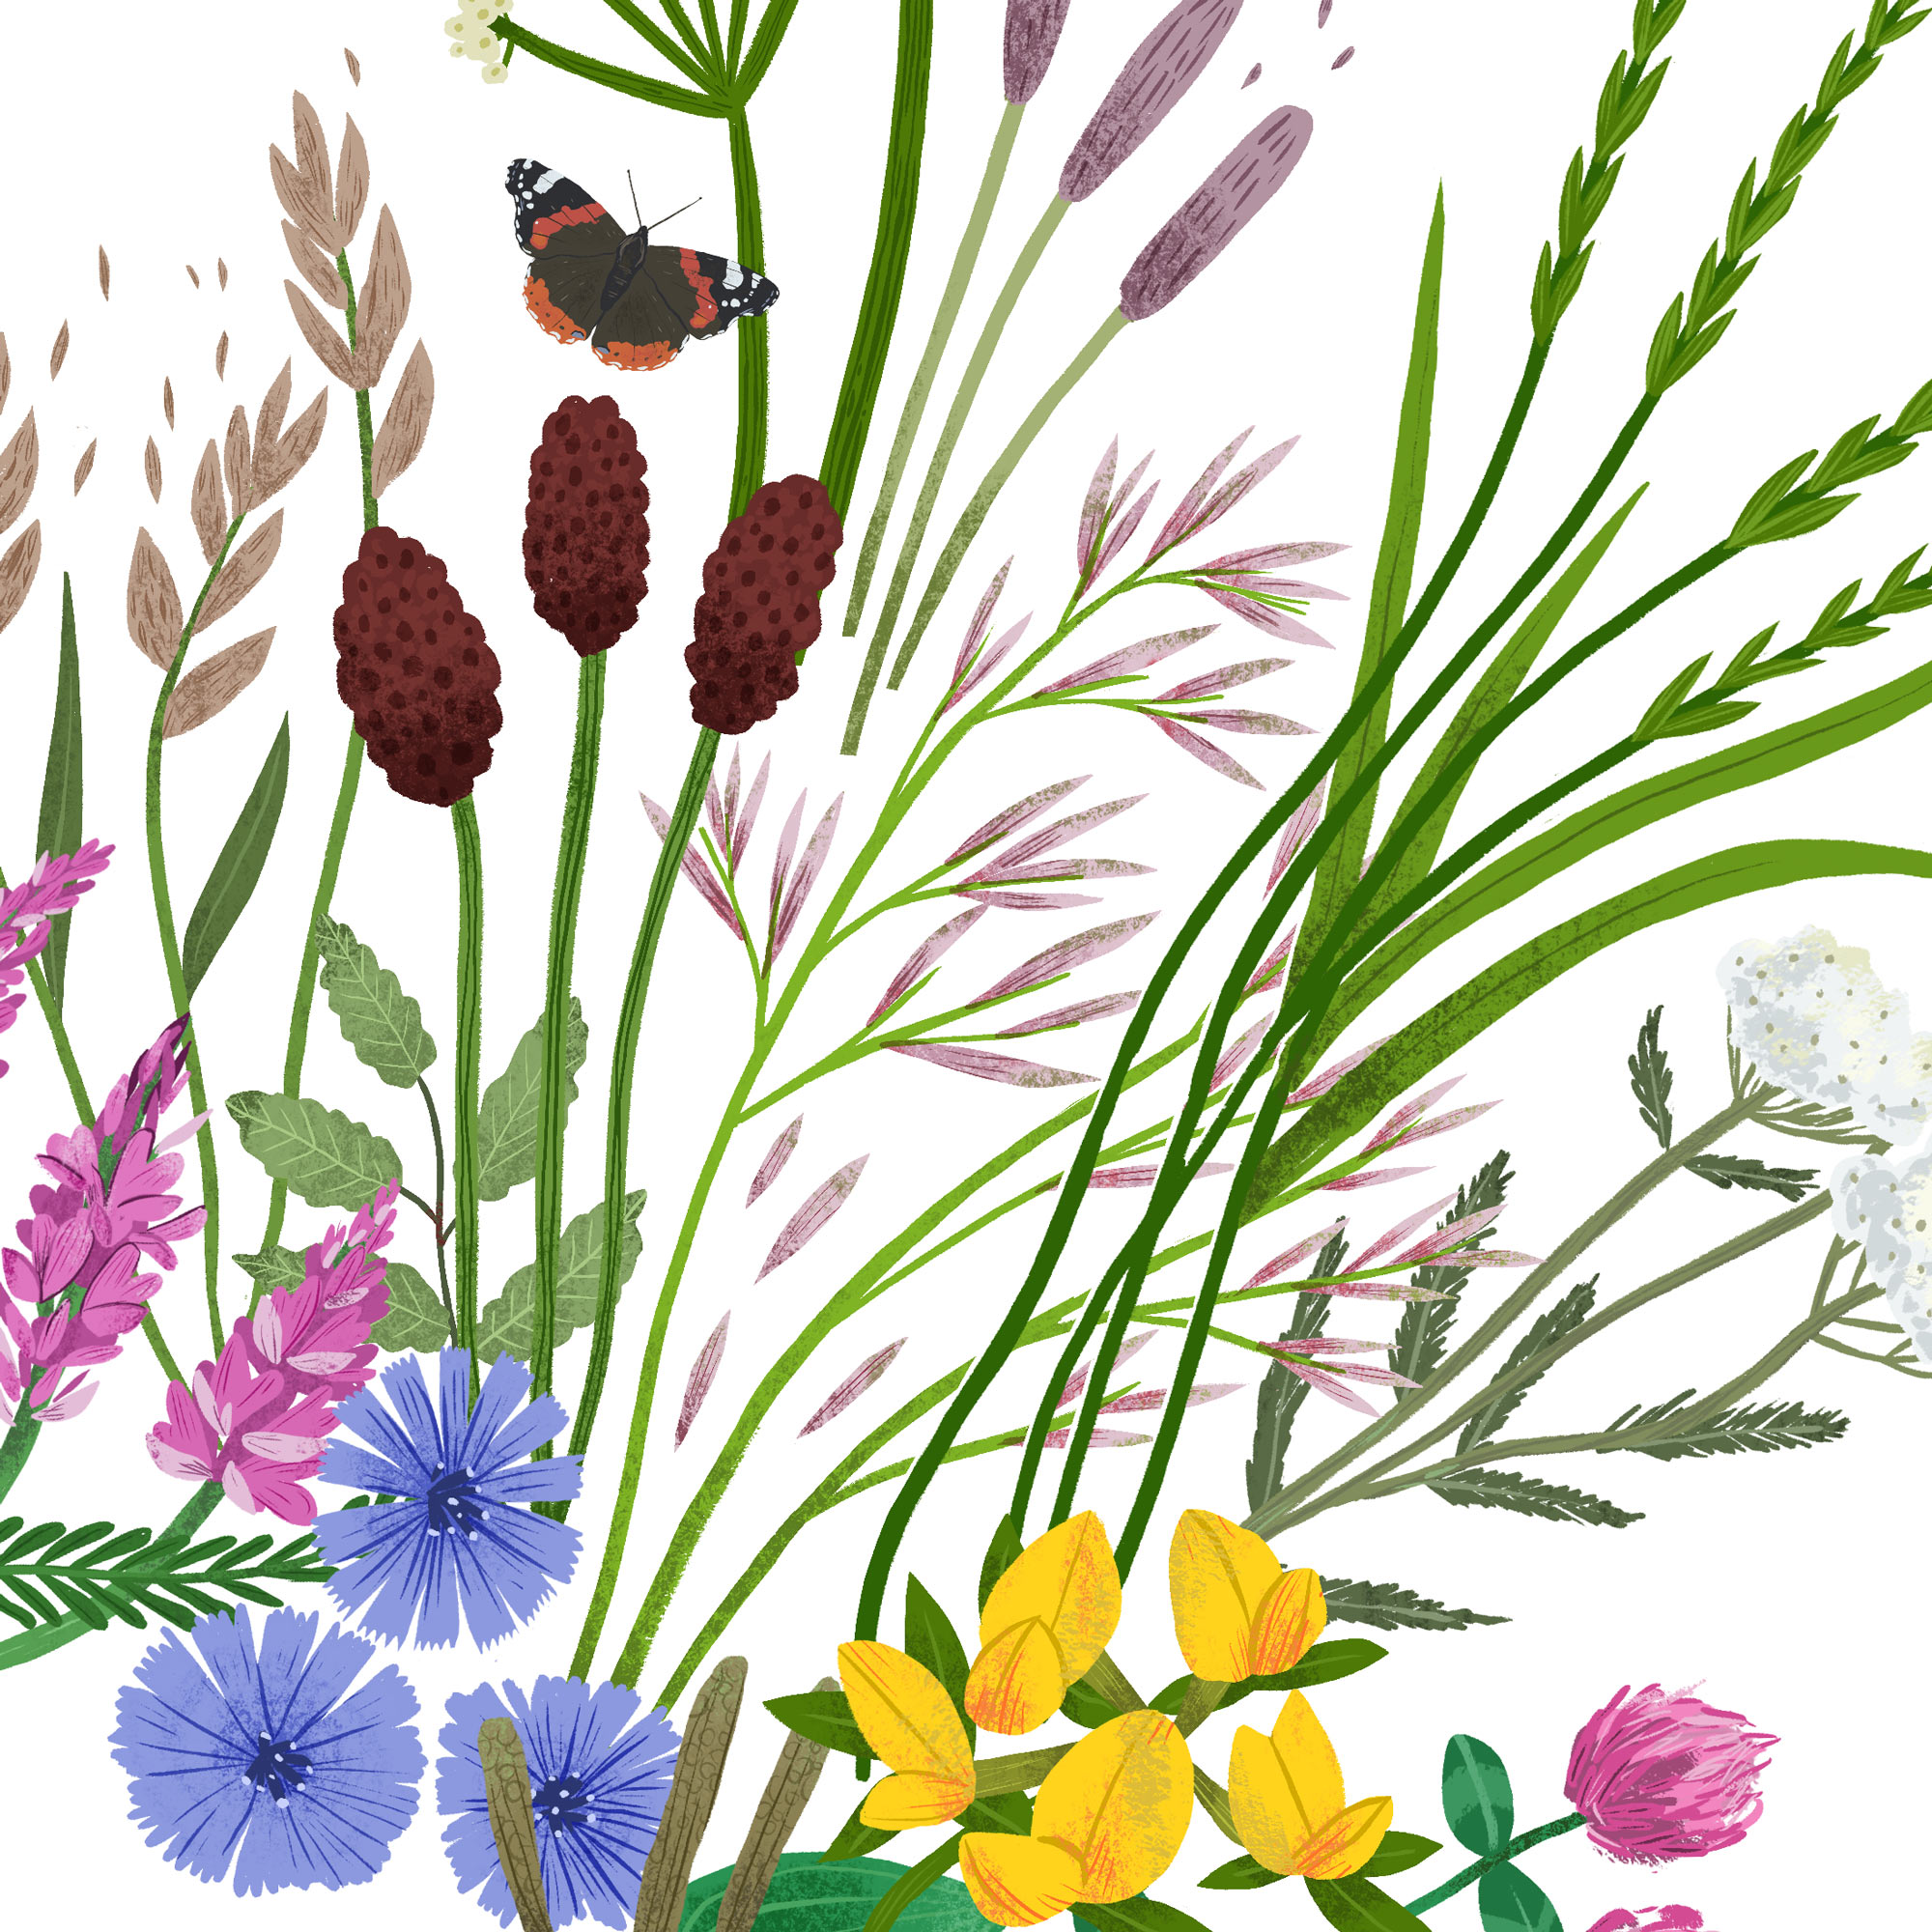 Illustrated flowers and grasses by Elly Jahnz 